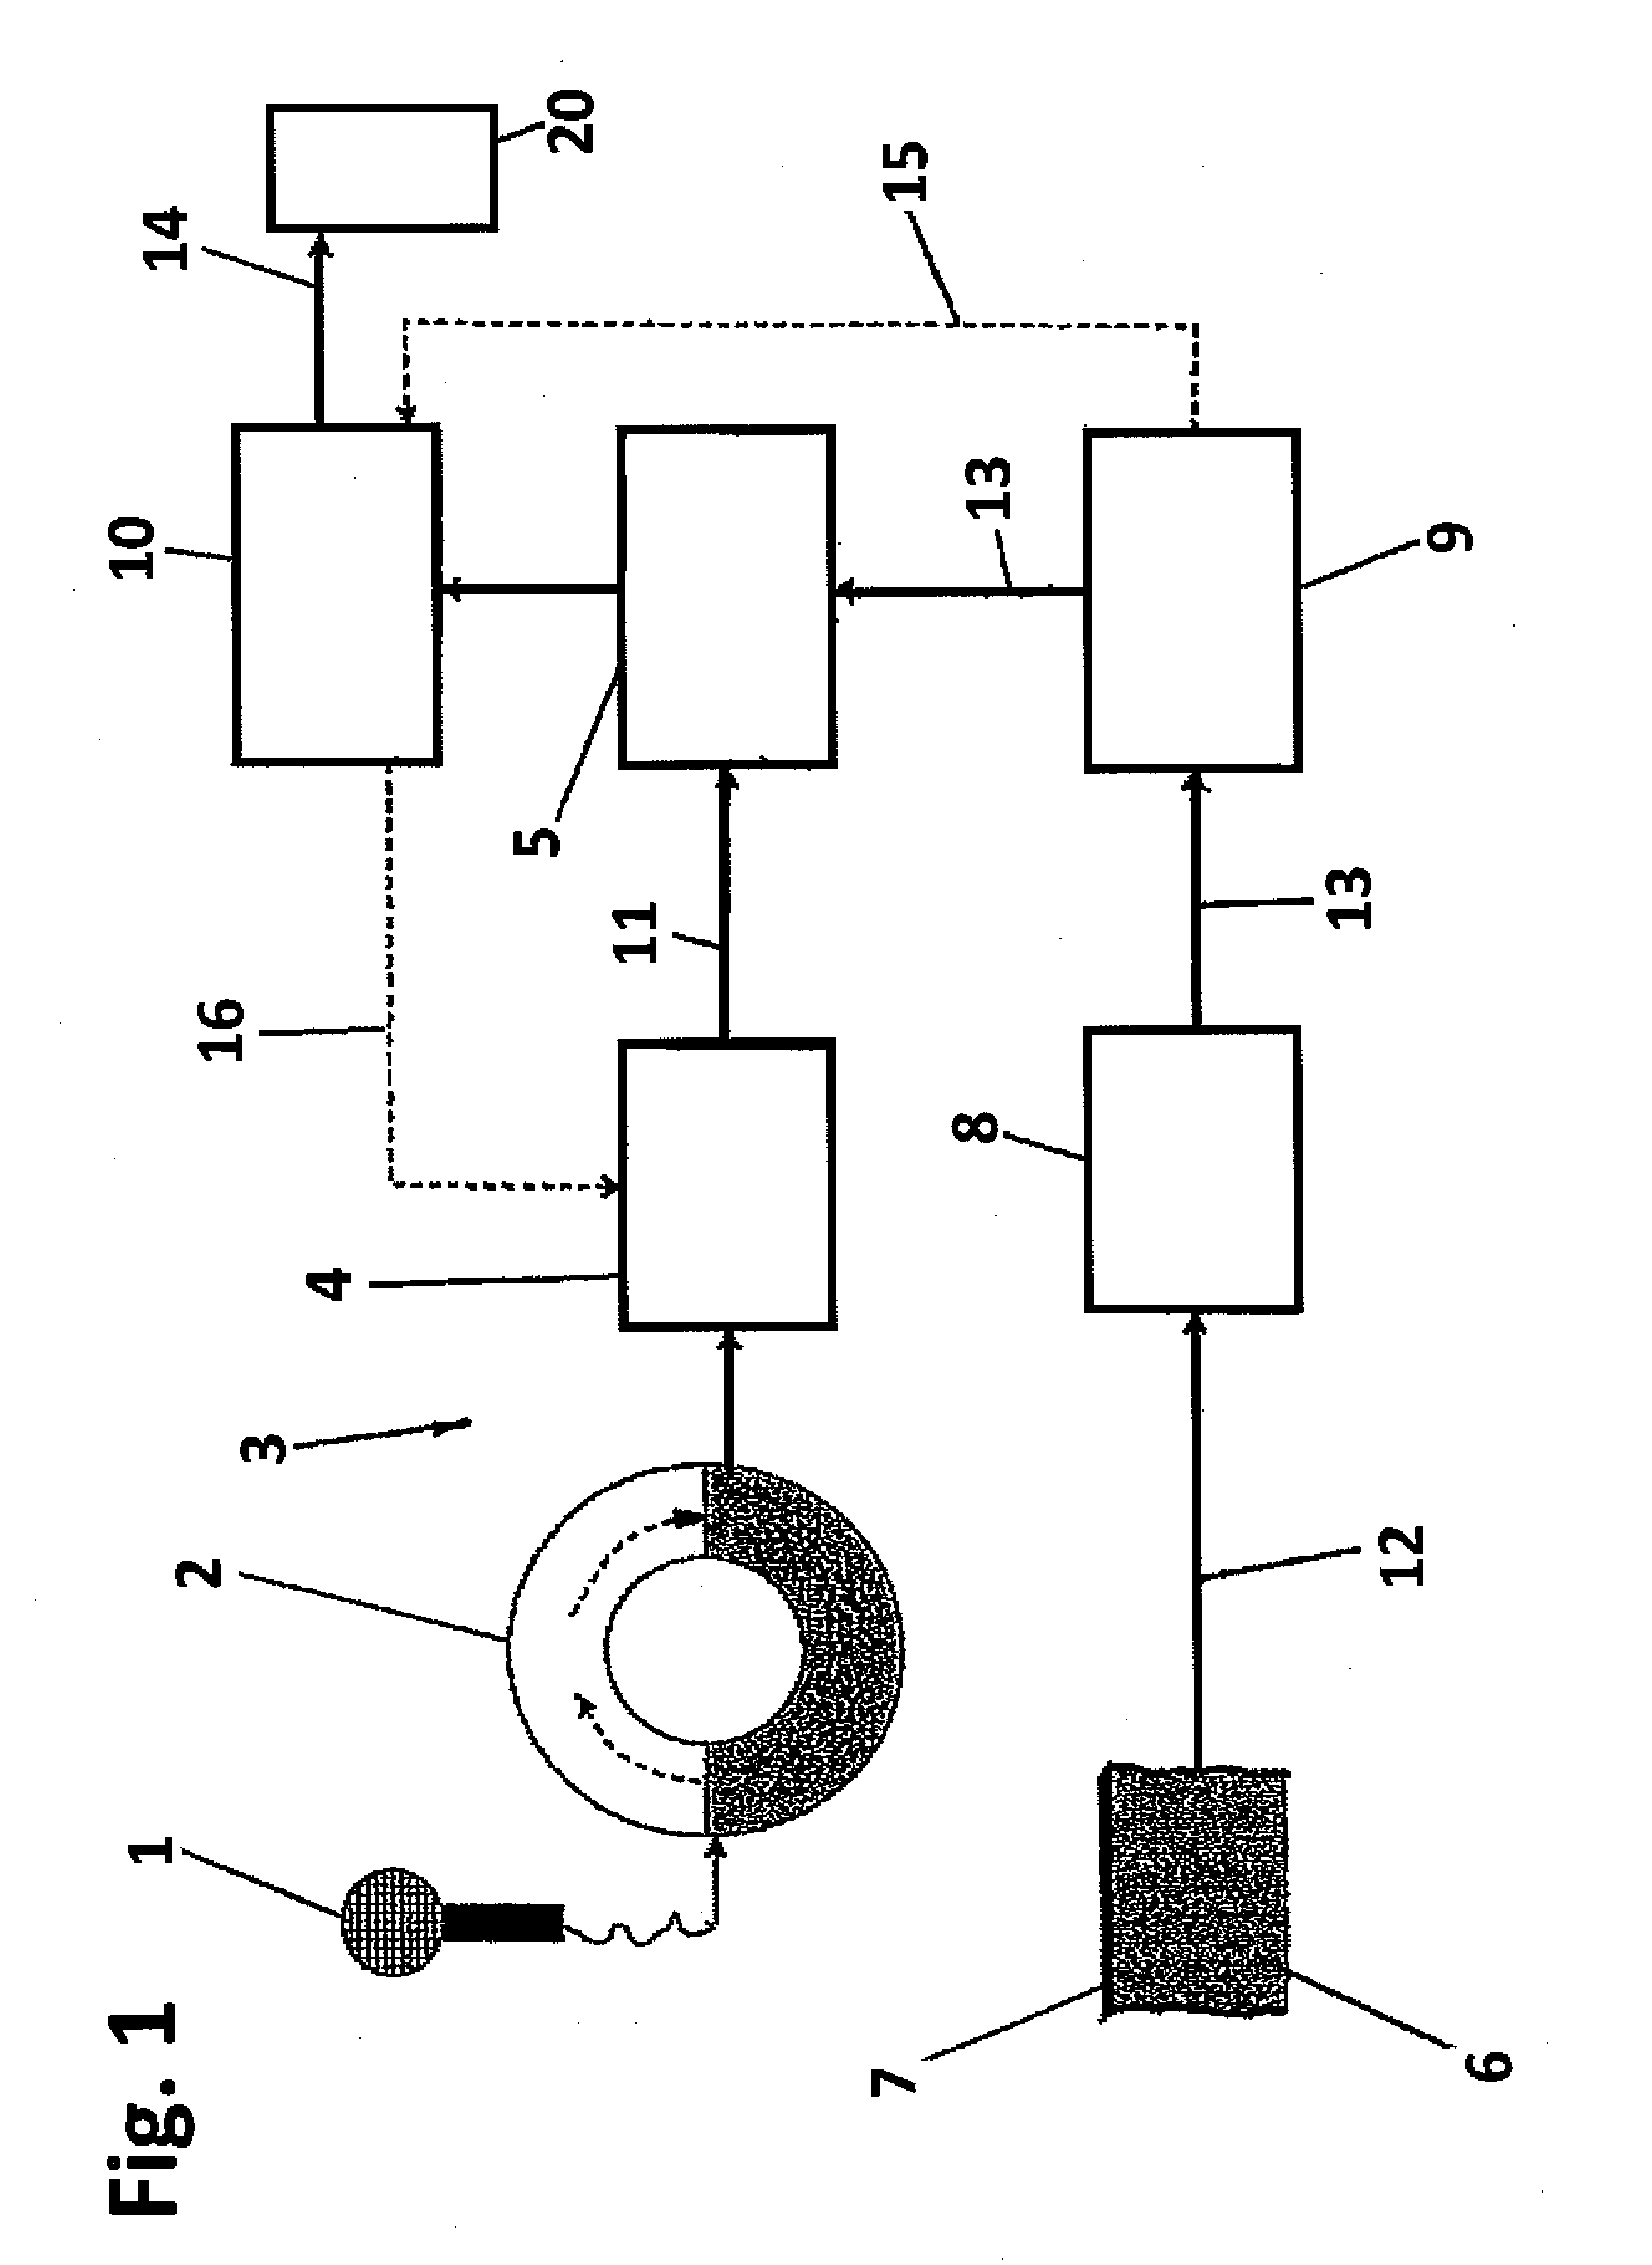 Method and device for operating technical equipment, in particular a motor vehicle